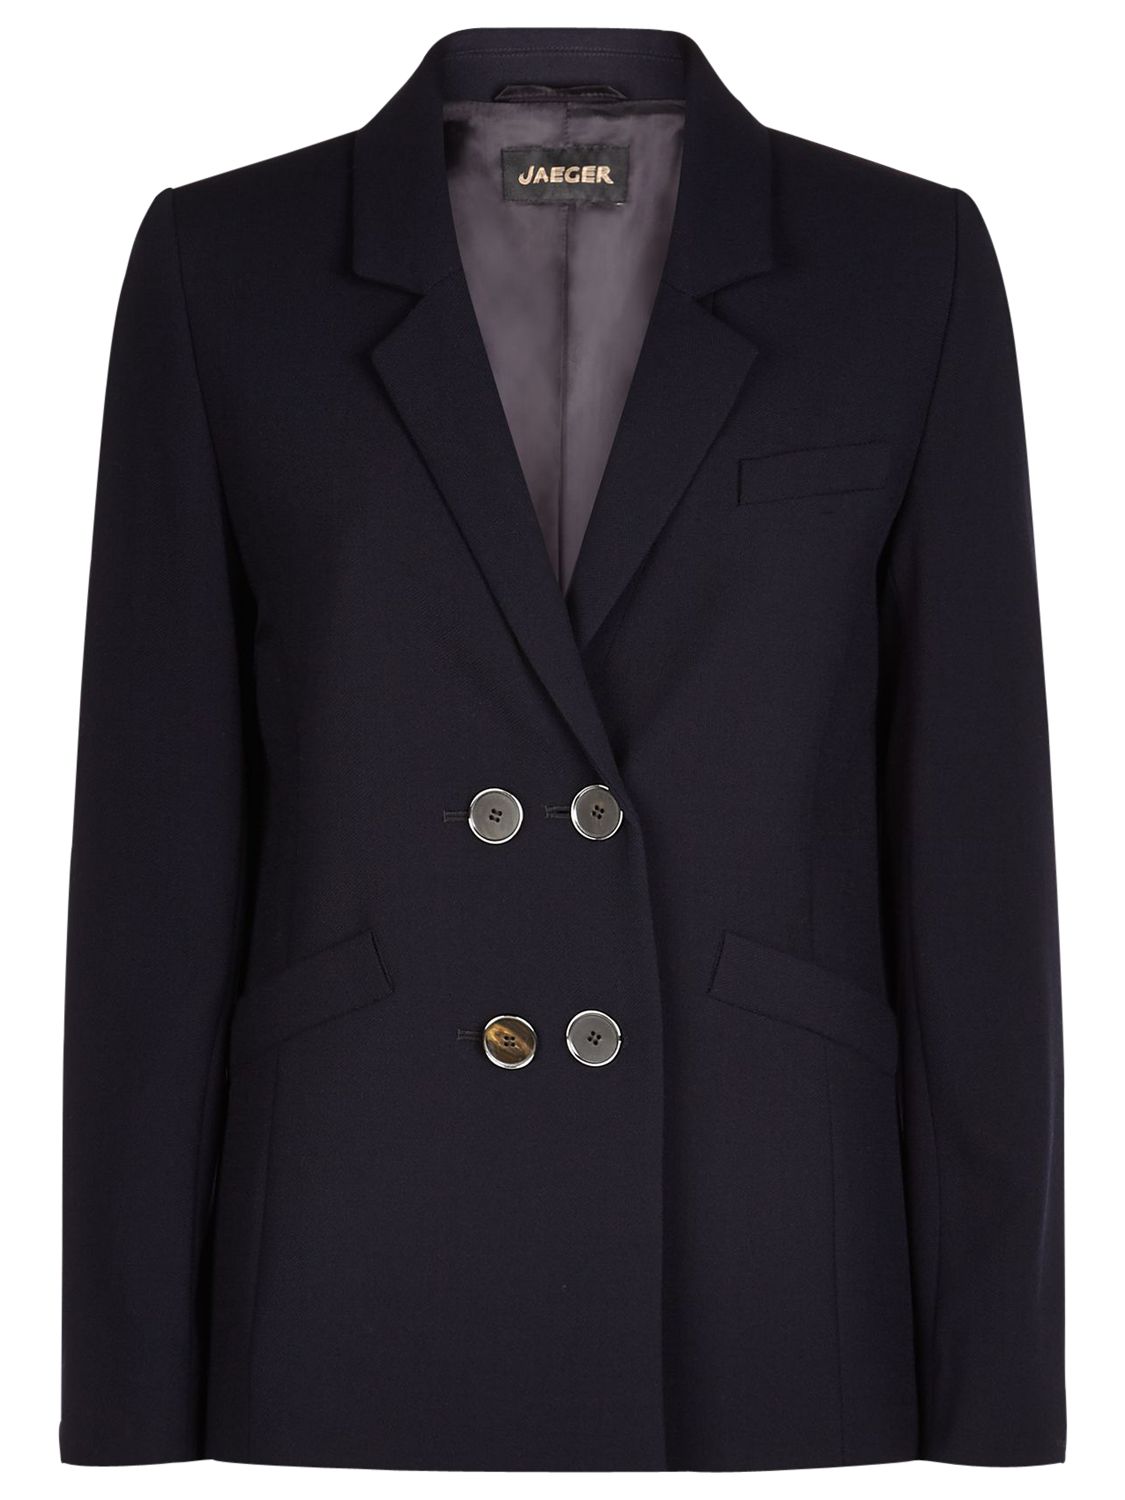 Jaeger Double Breasted Blazer, Midnight